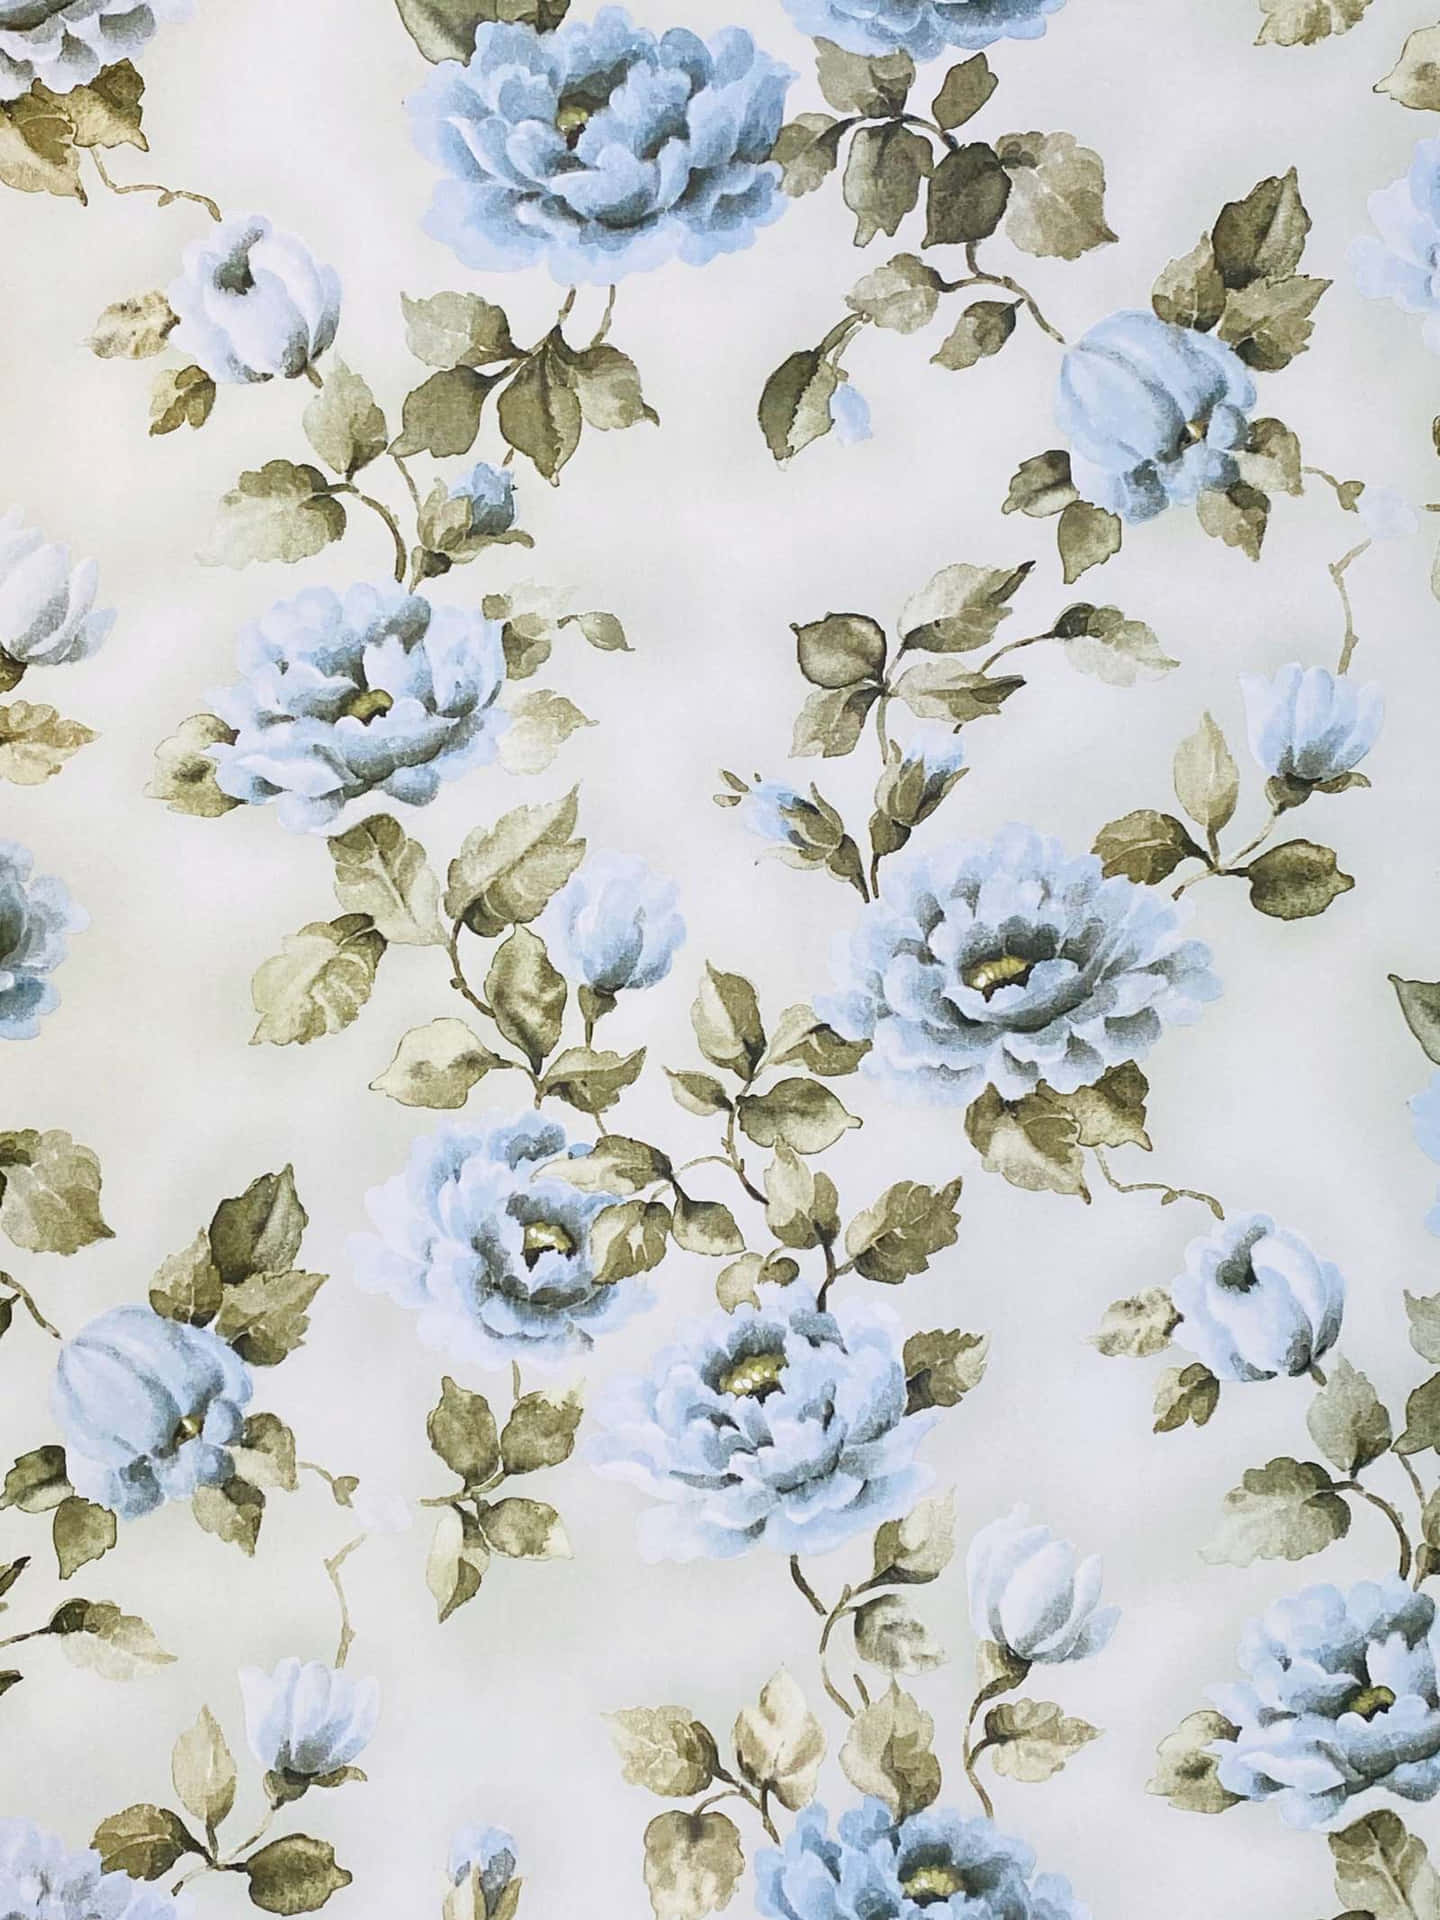 Enjoy spring's freshness all year long with a bright blue floral background!